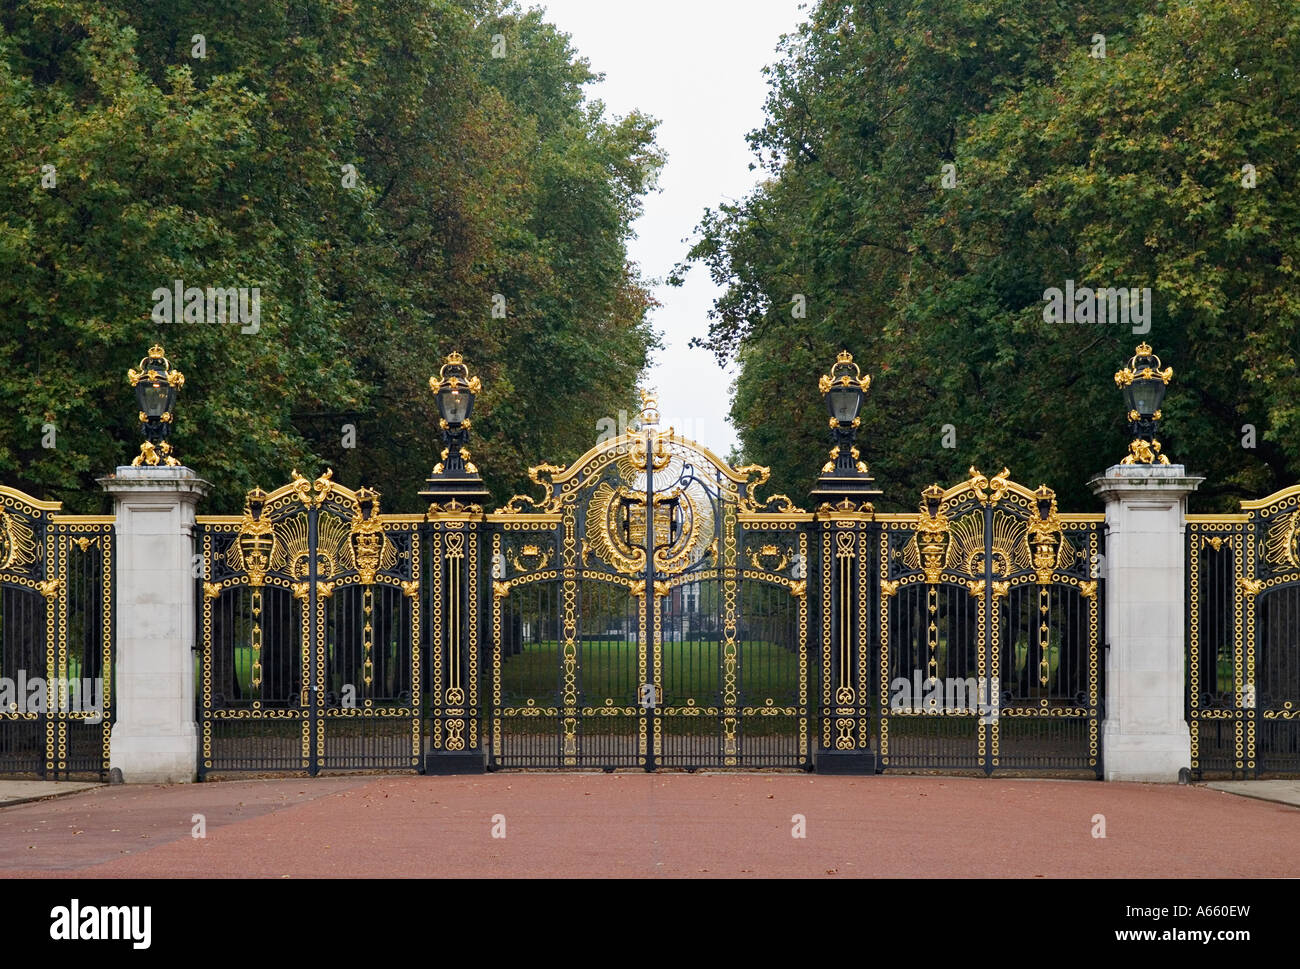 Canada Gate with the Green Park Beyond Near Buckingham Palace London England Stock Photo